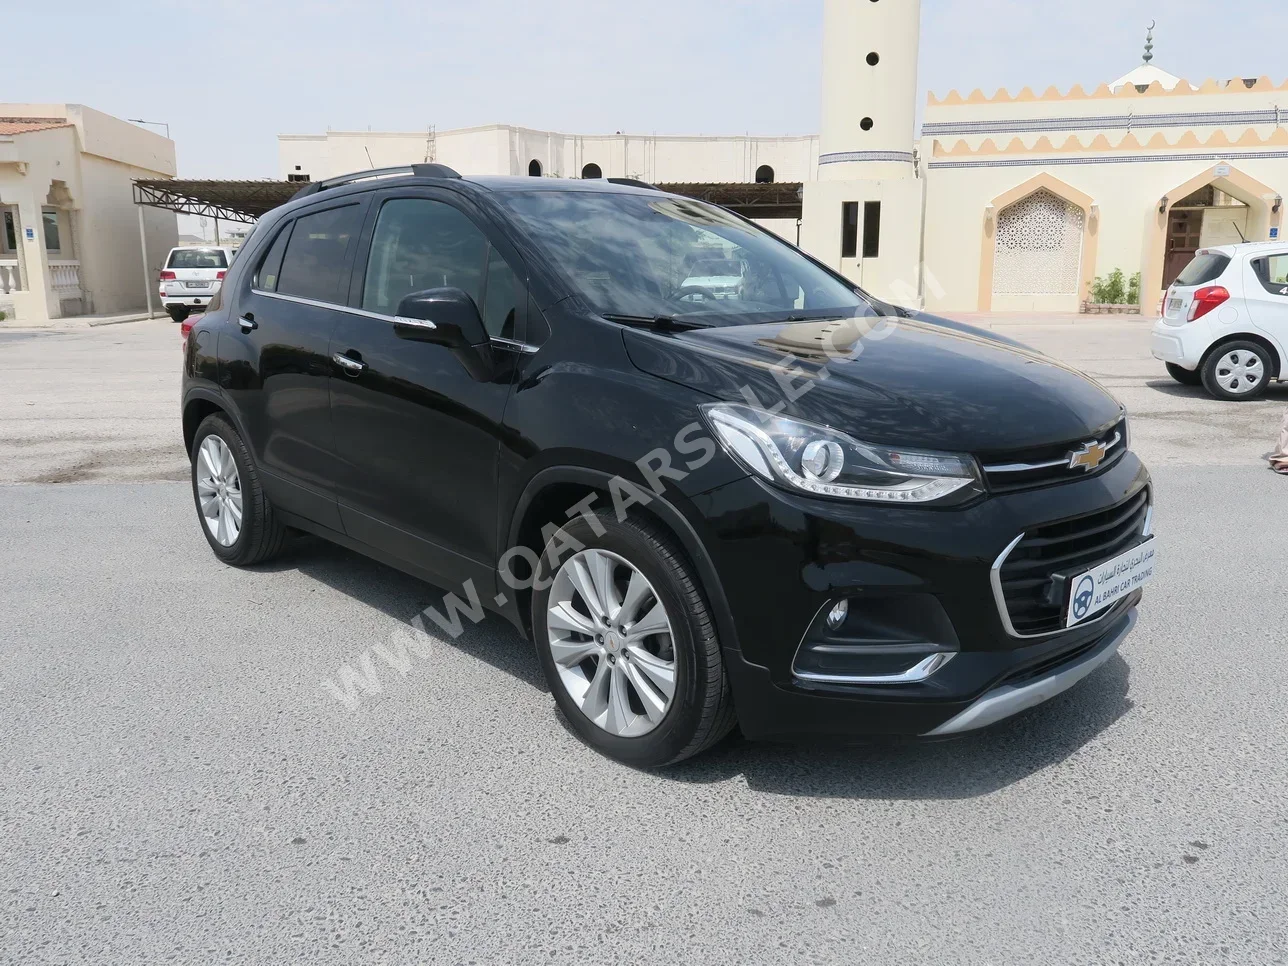 Chevrolet  Trax  2019  Automatic  61٬000 Km  4 Cylinder  Front Wheel Drive (FWD)  Hatchback  Black